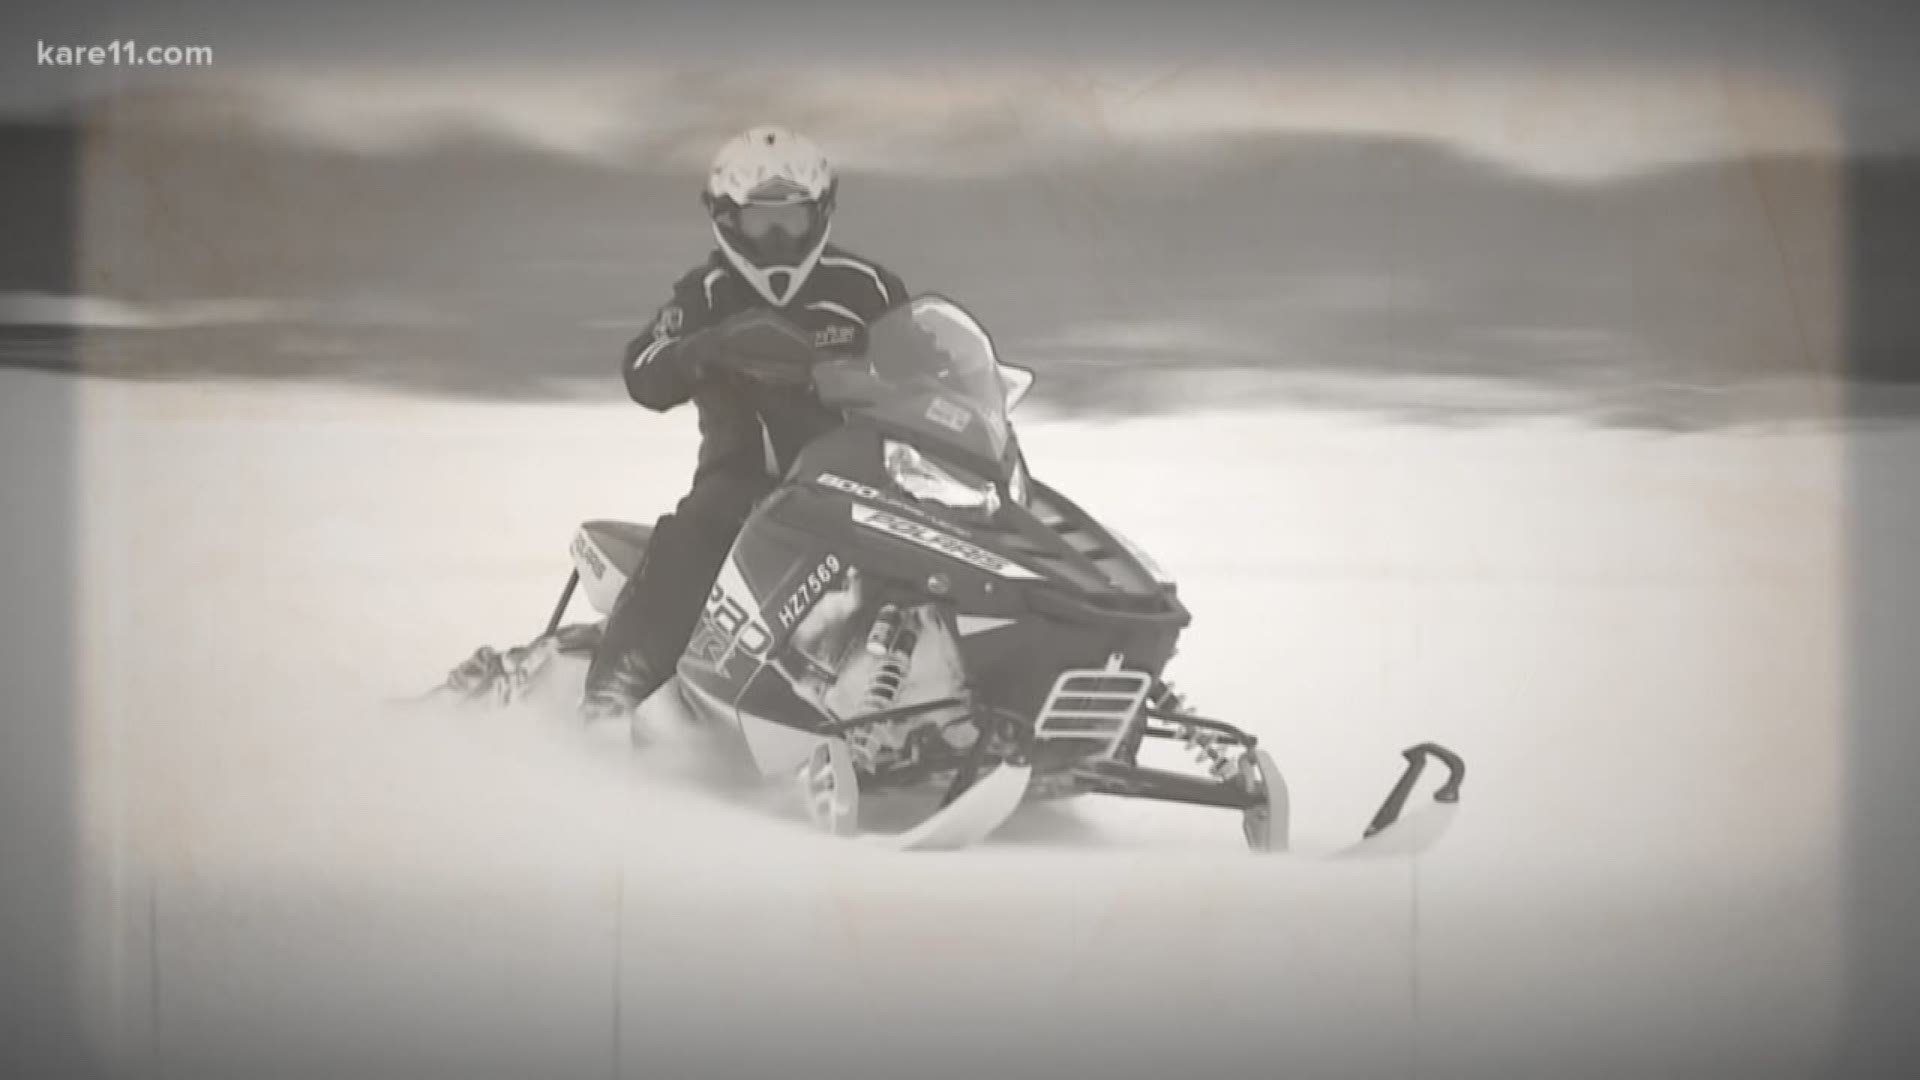 A Lake Elmo man is grateful to be alive. A day of fun and adventure in snowmobiling almost turned into tragedy.